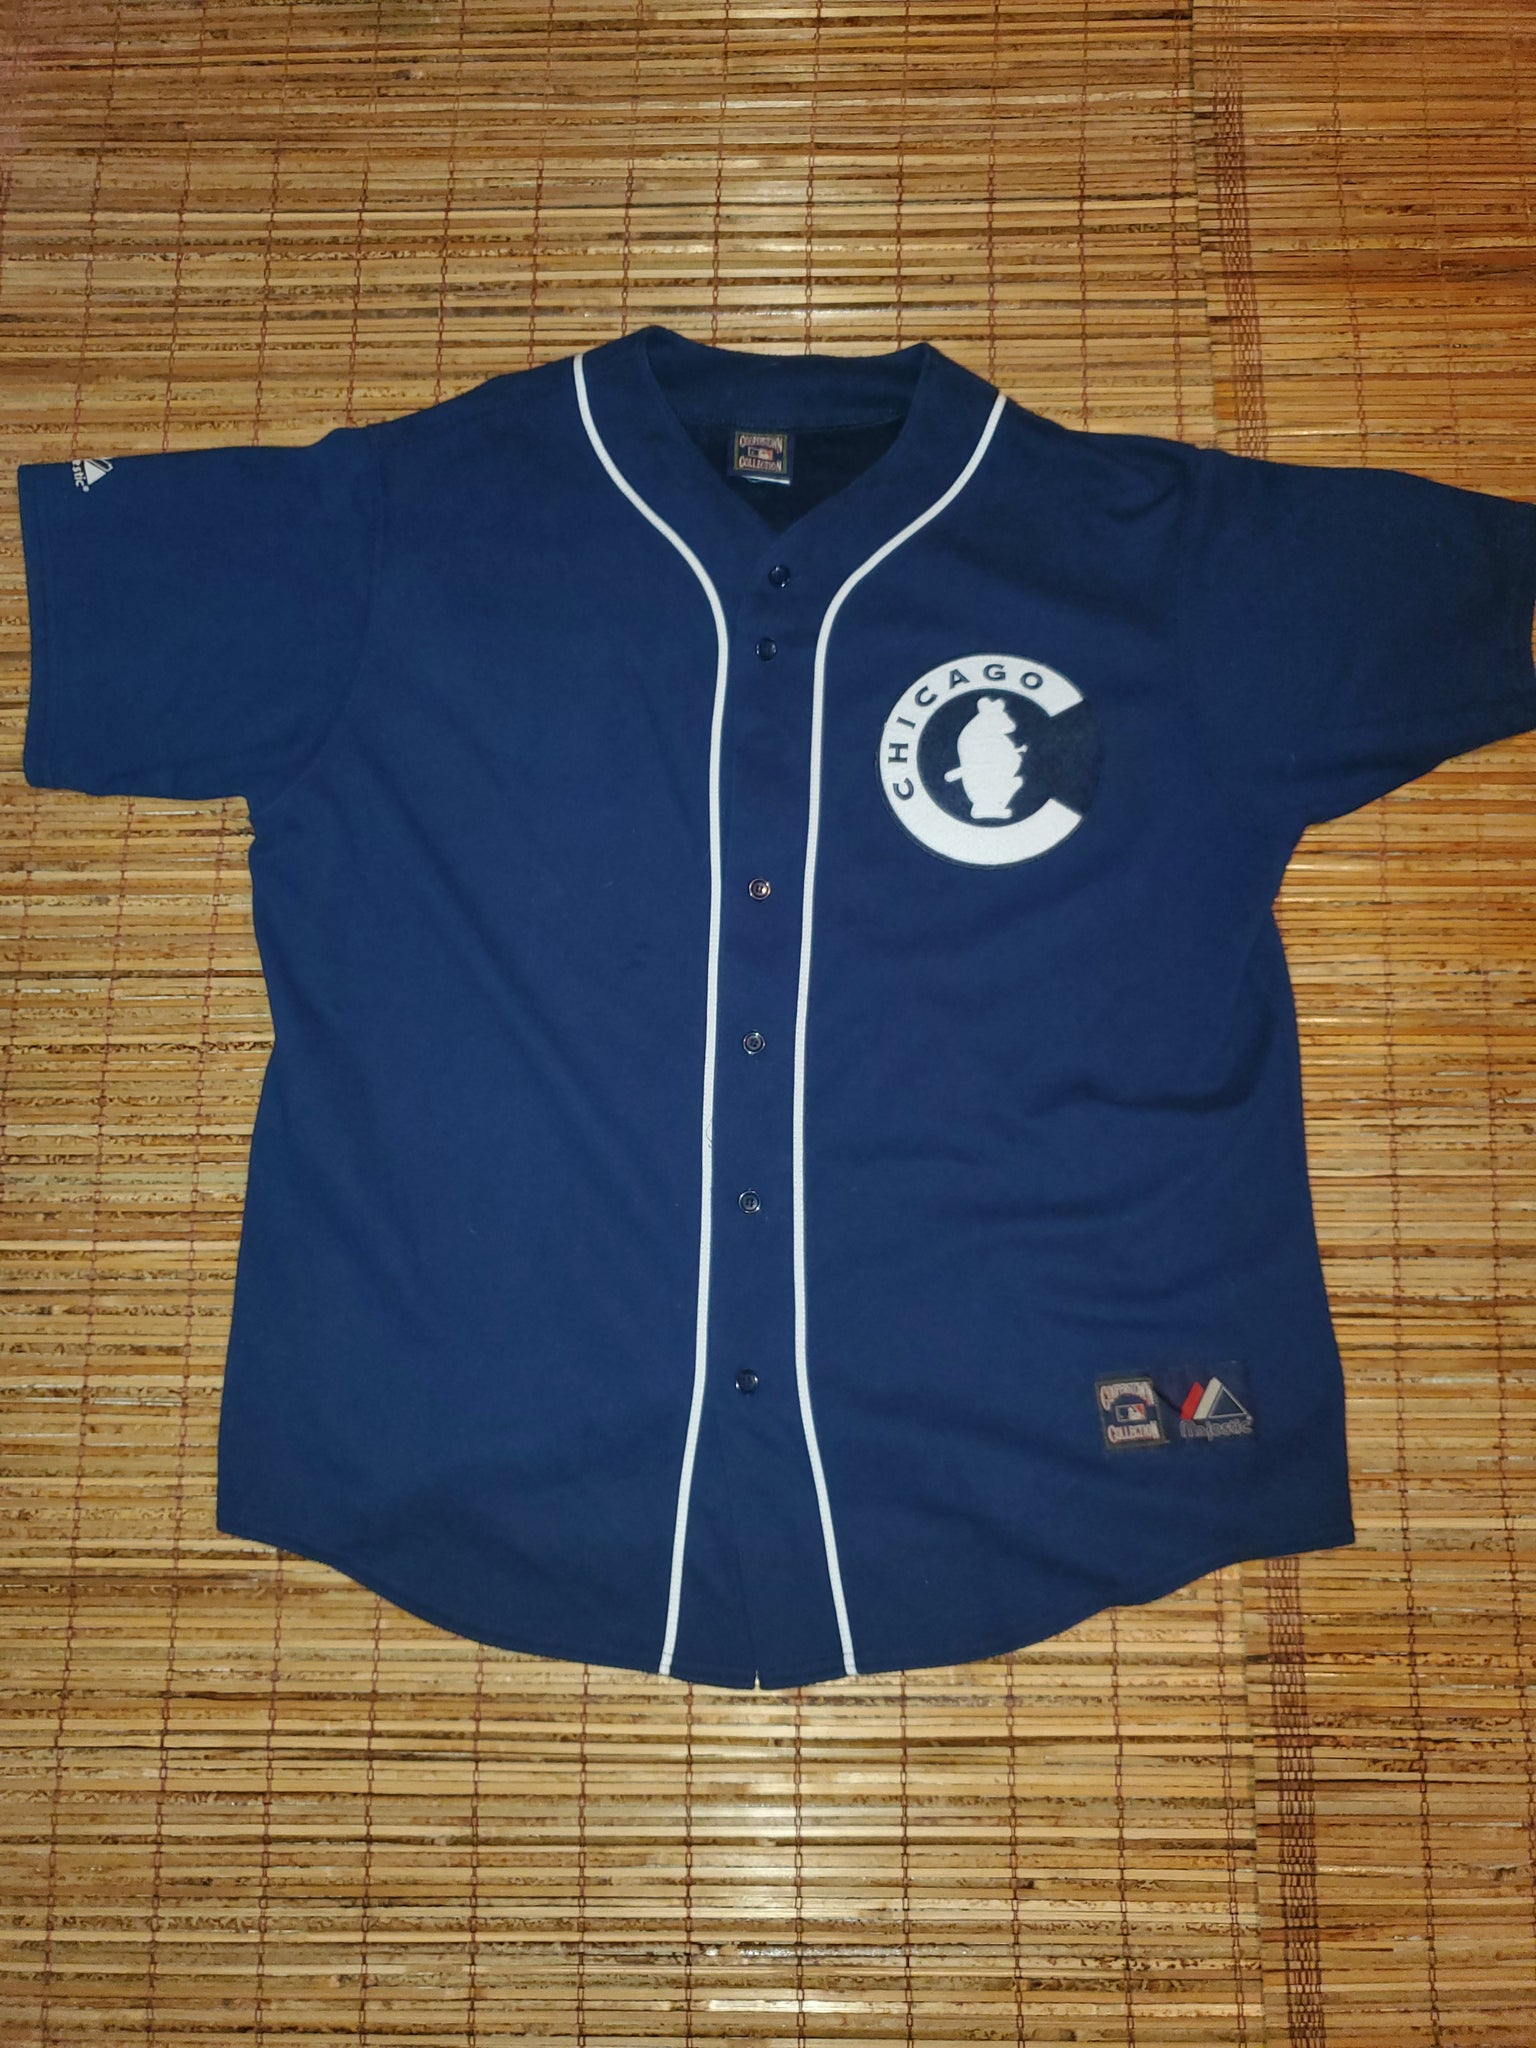 AMAZING VINTAGE MAJESTIC CHICAGO CUBS 1914 JERSEY WITH OLD STYLE